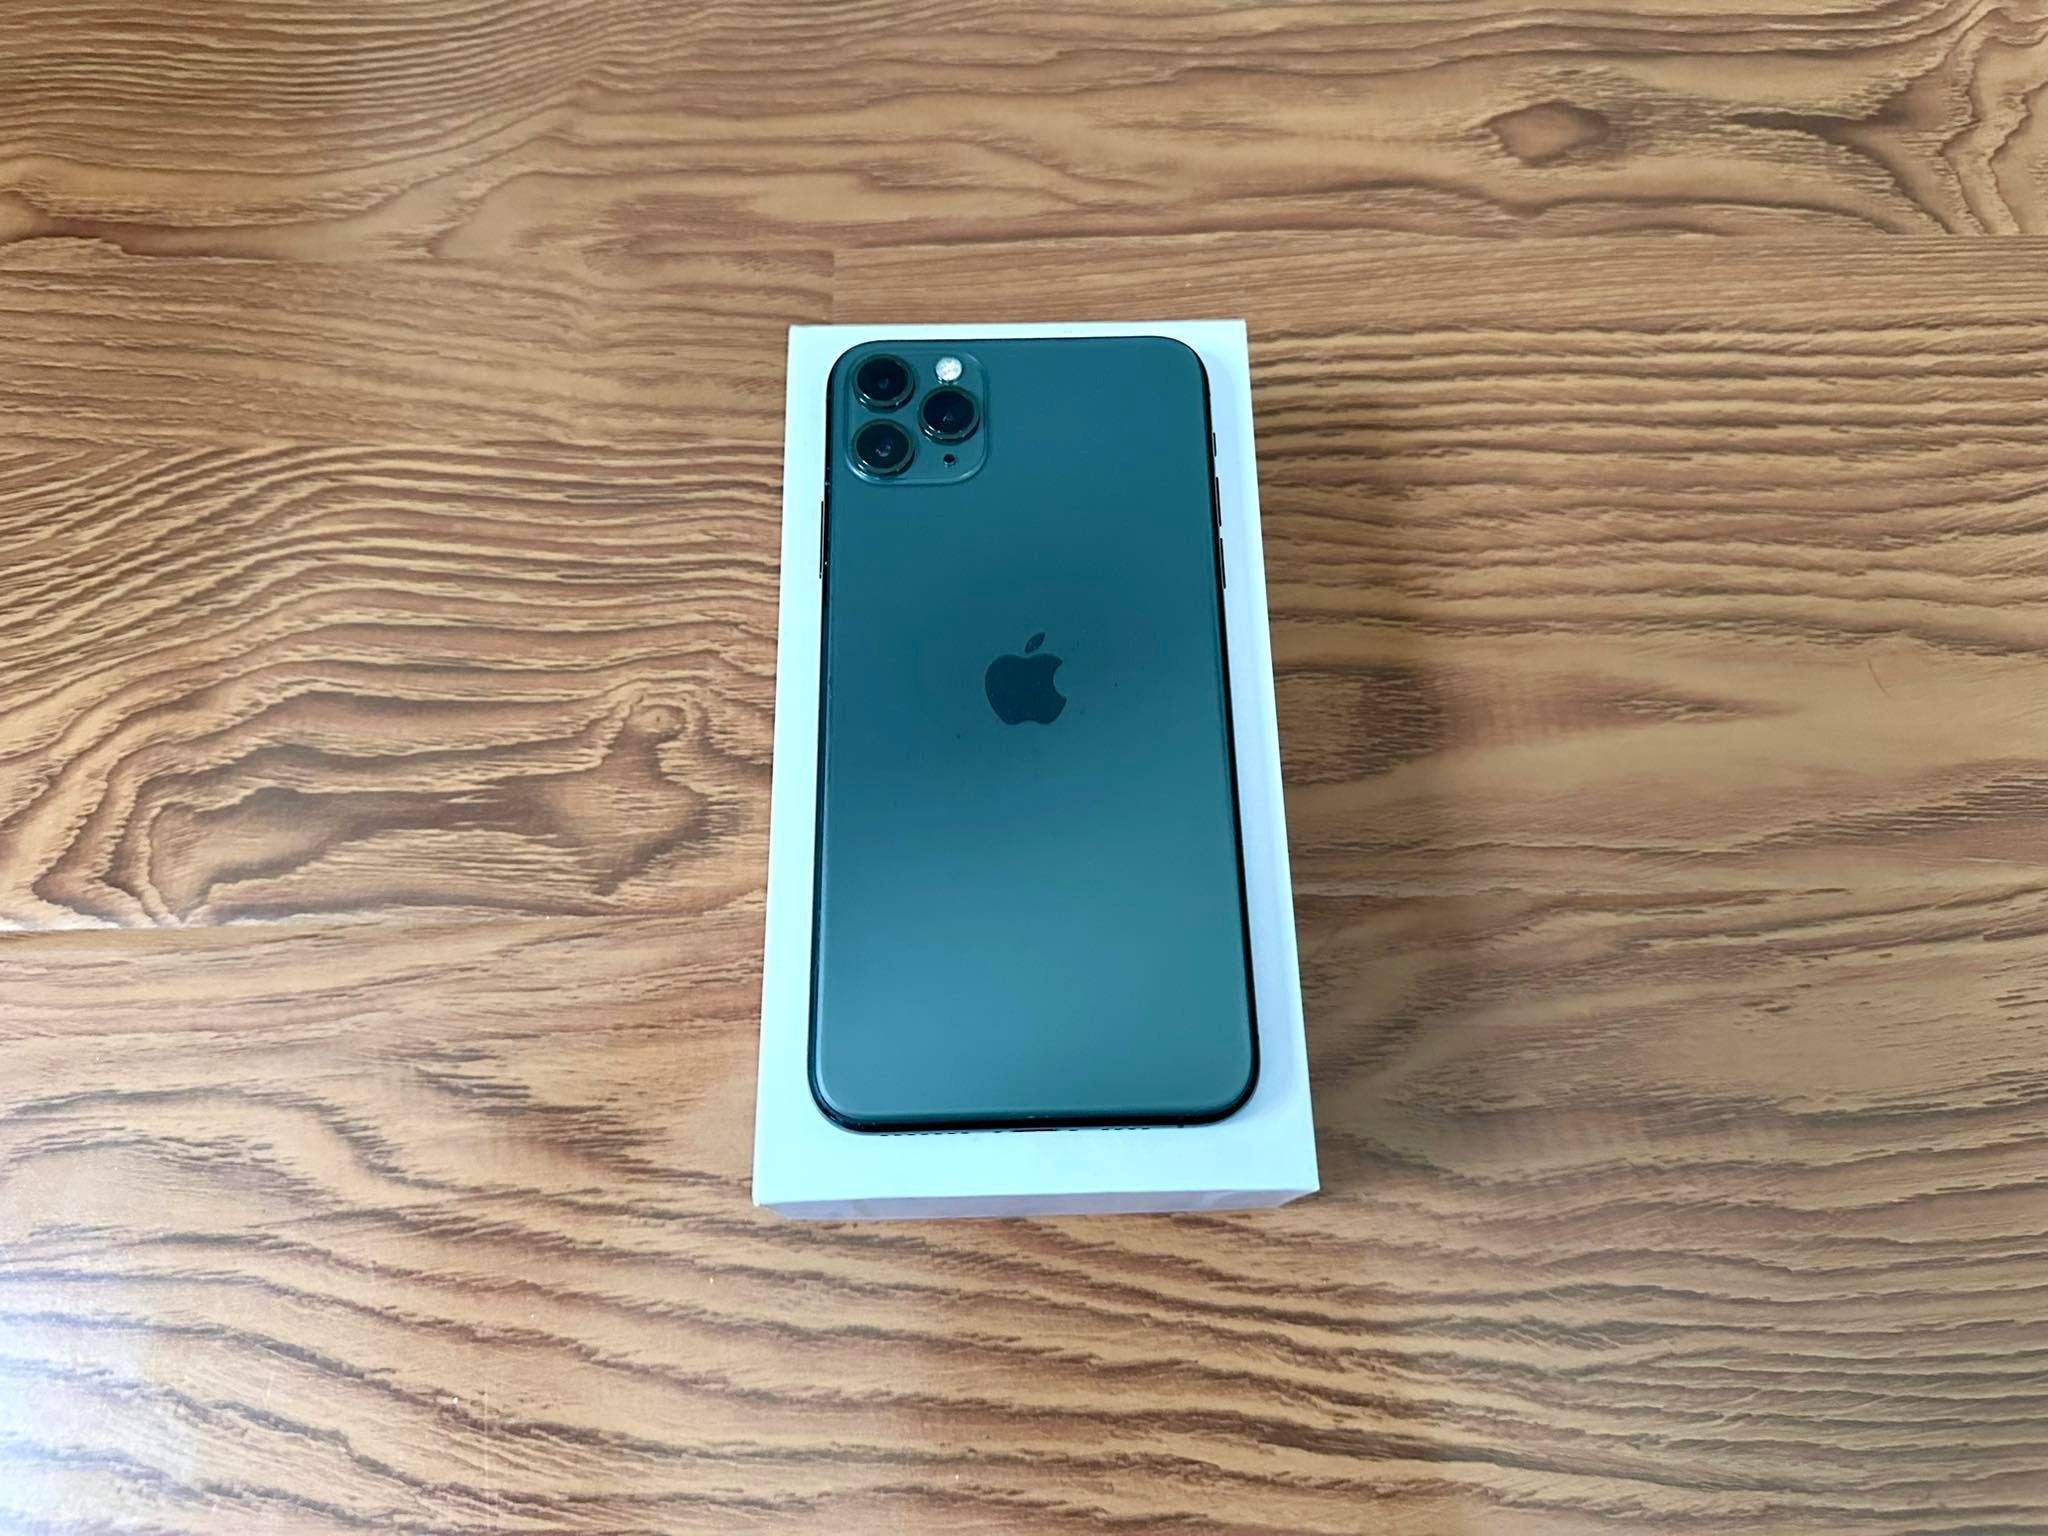 Apple iPhone 11 Pro Max 64GB Black Midnight Green W New Battery, Case, Screen Protector & Shipping (Exc)